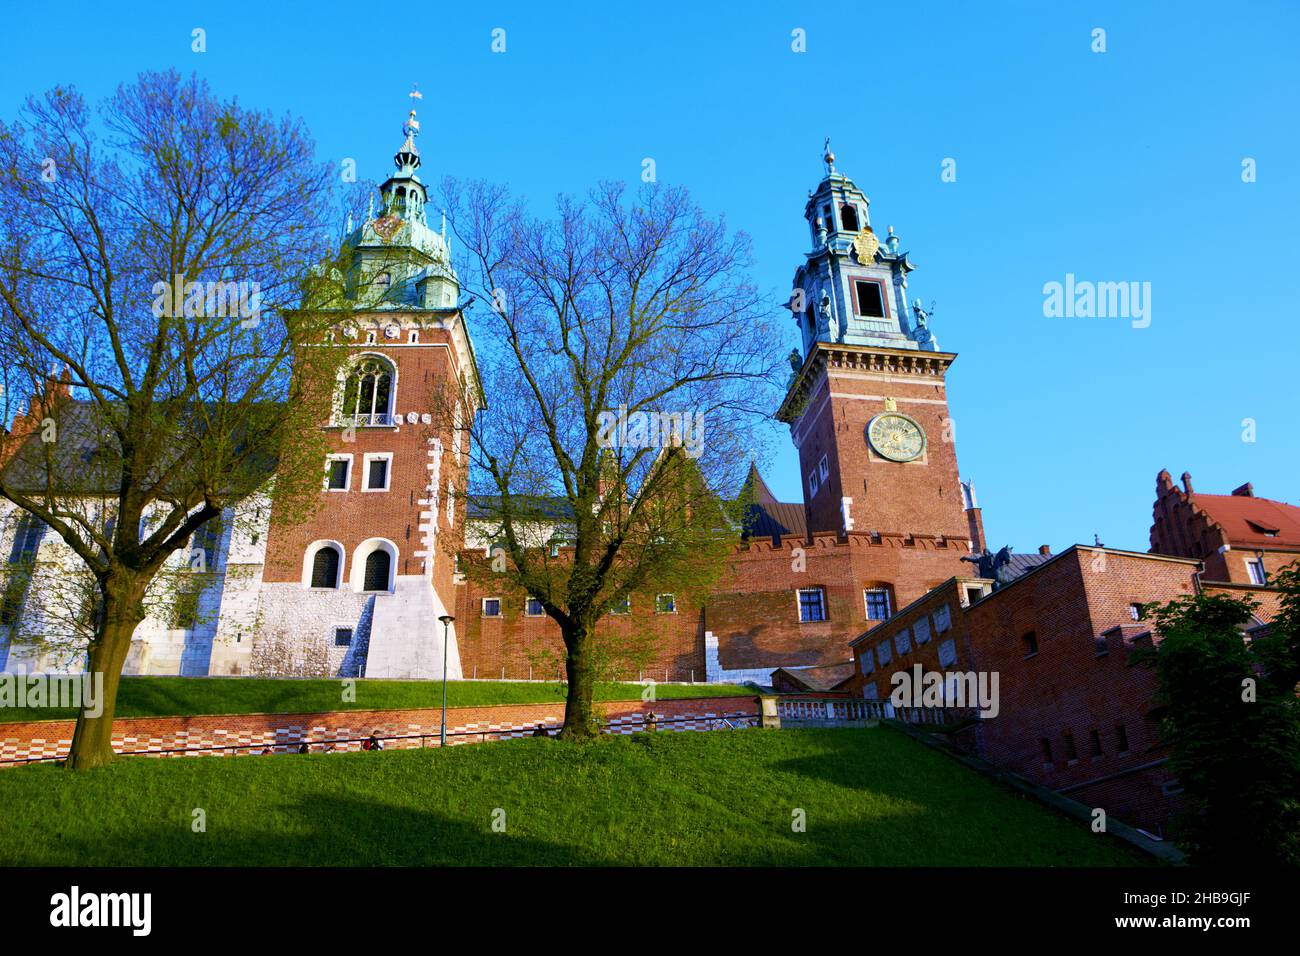 Poland, Cracow, Wawel castle, Cathedral. Stock Photo